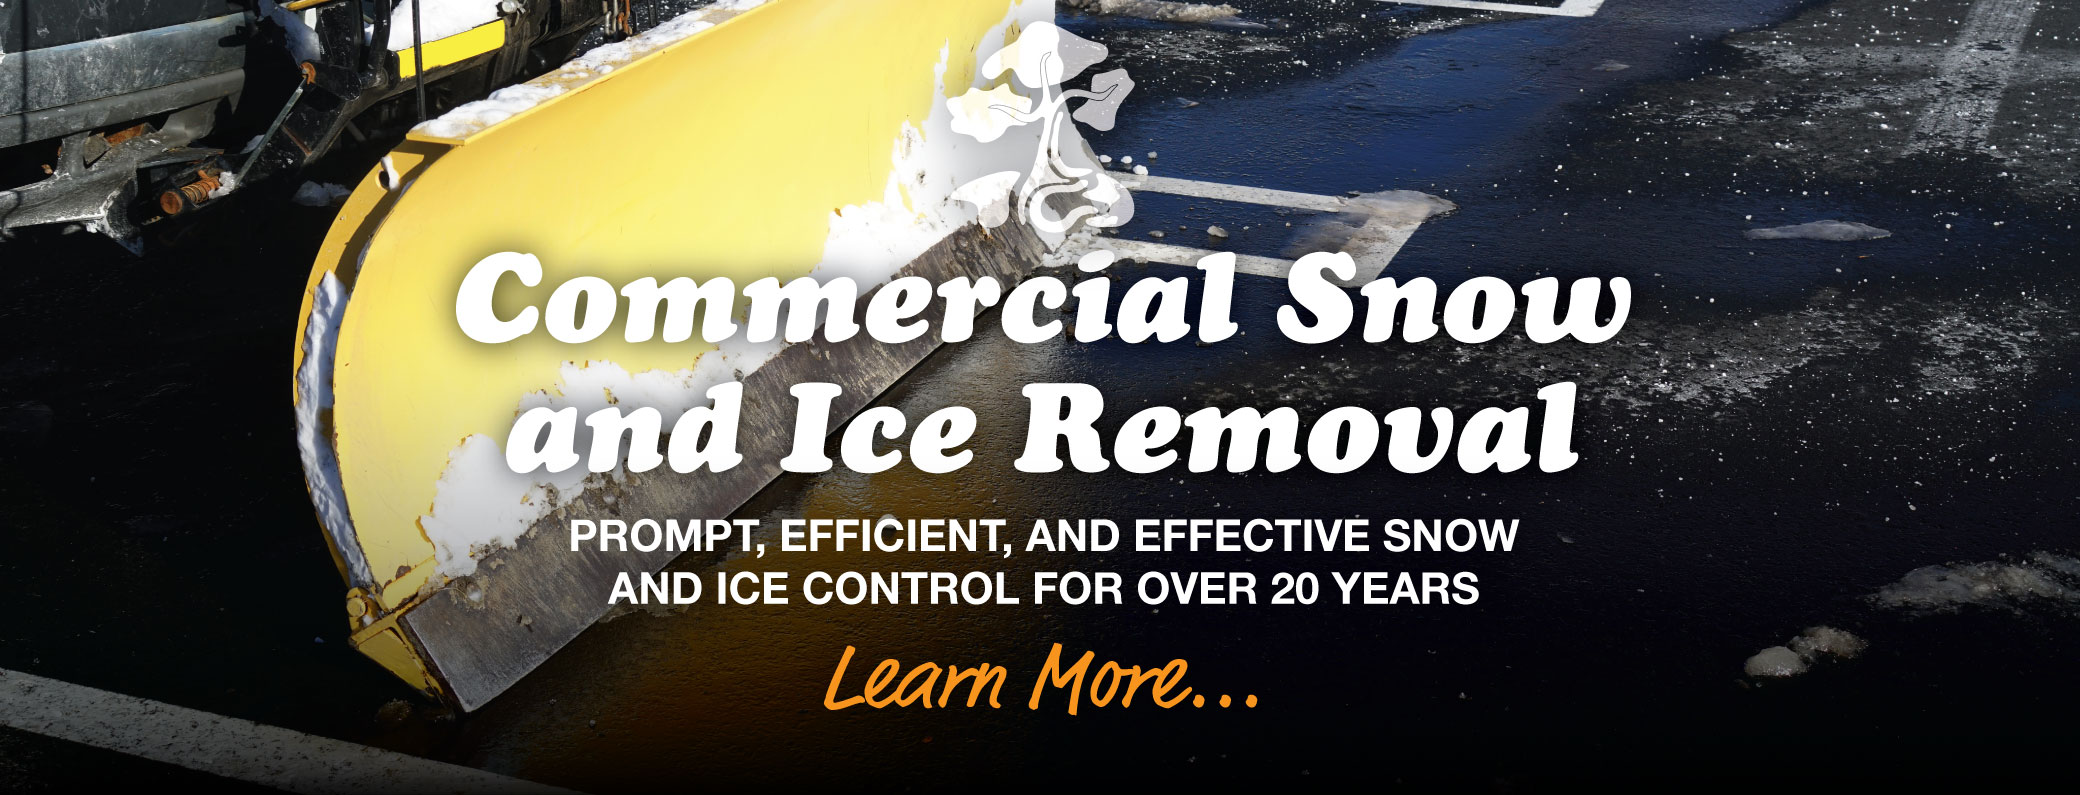 Commercial Snow and Ice Removal Slide